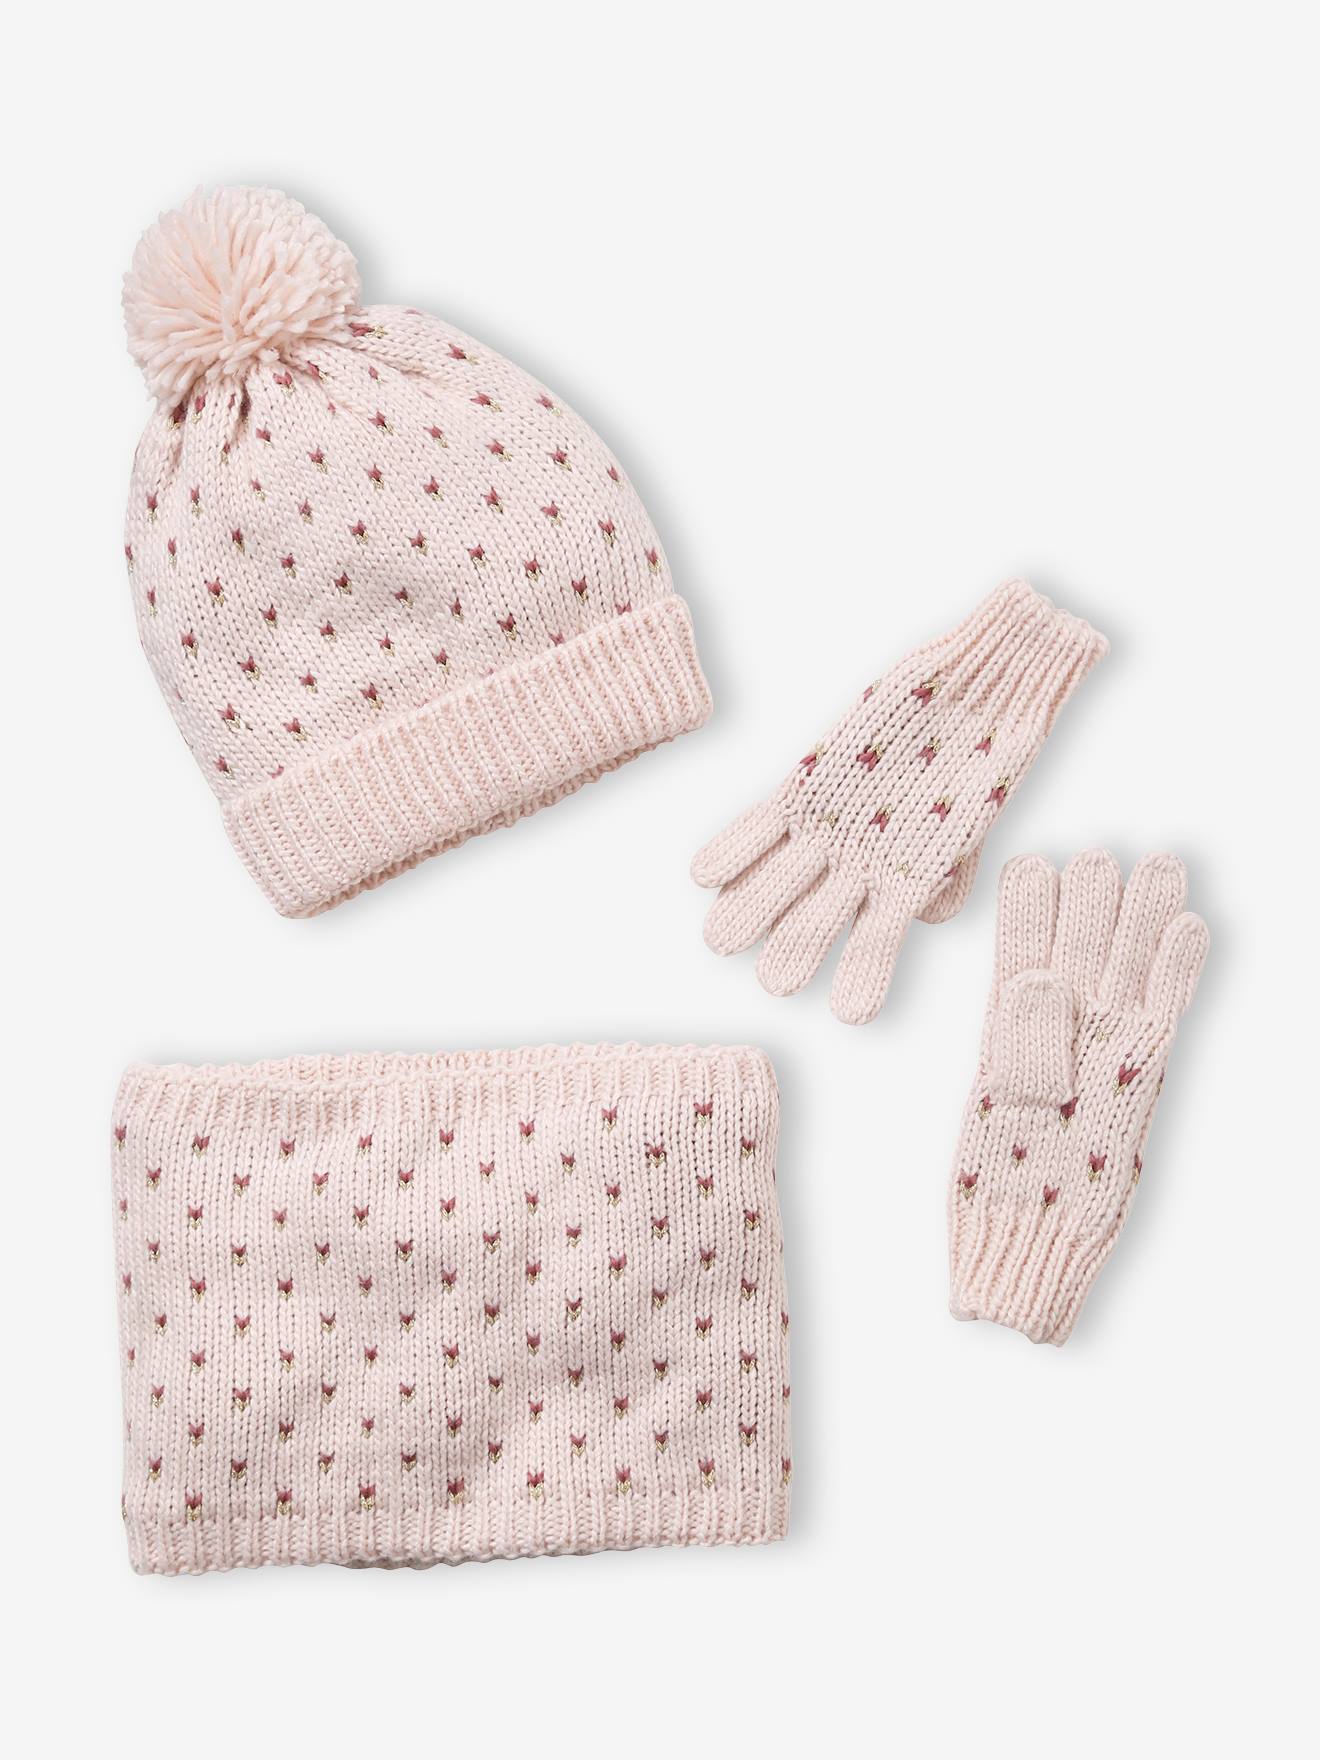 Beanie + Snood + Gloves with Hearts Set for Girls pink light solid with design